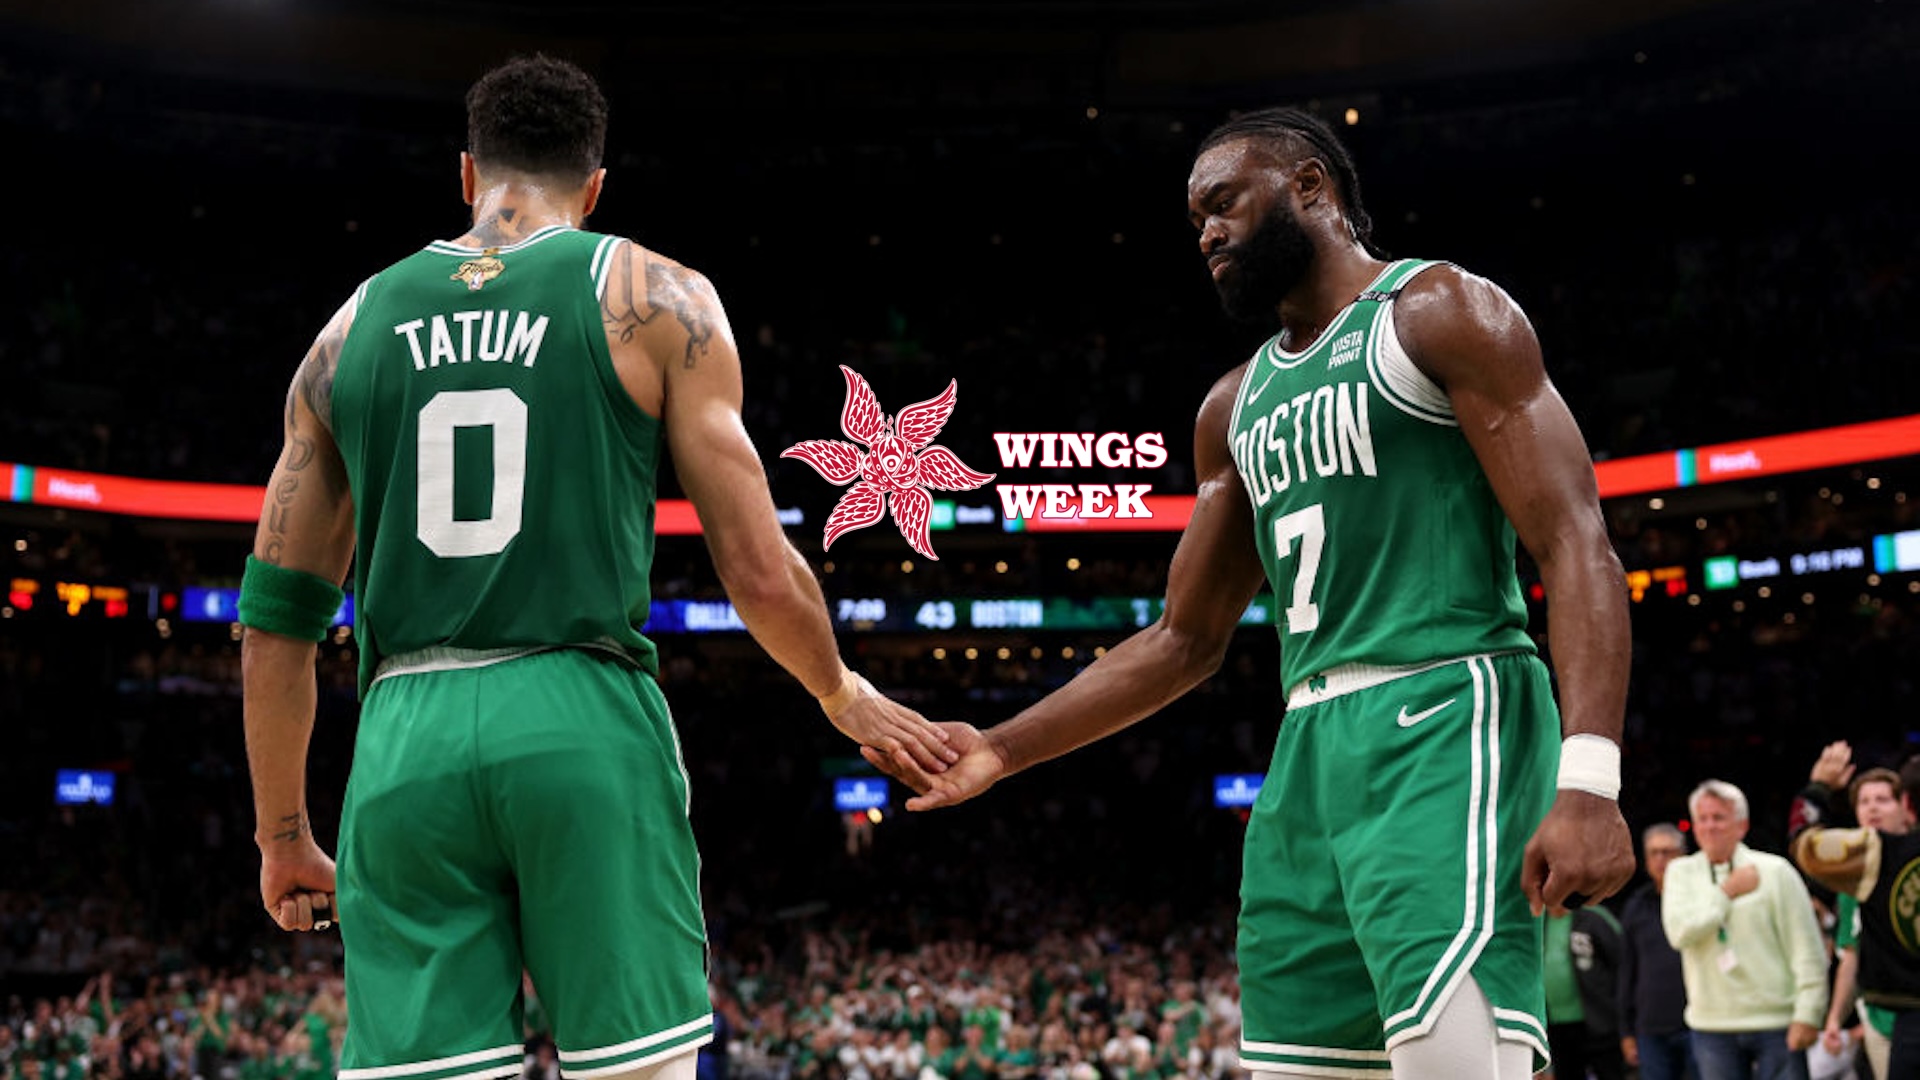 Jayson Tatum #0 high fives Jaylen Brown #7 of the Boston Celtics after a play against the Dallas Mavericks during the second quarter of Game Five of the 2024 NBA Finals at TD Garden on June 17, 2024 in Boston, Massachusetts.